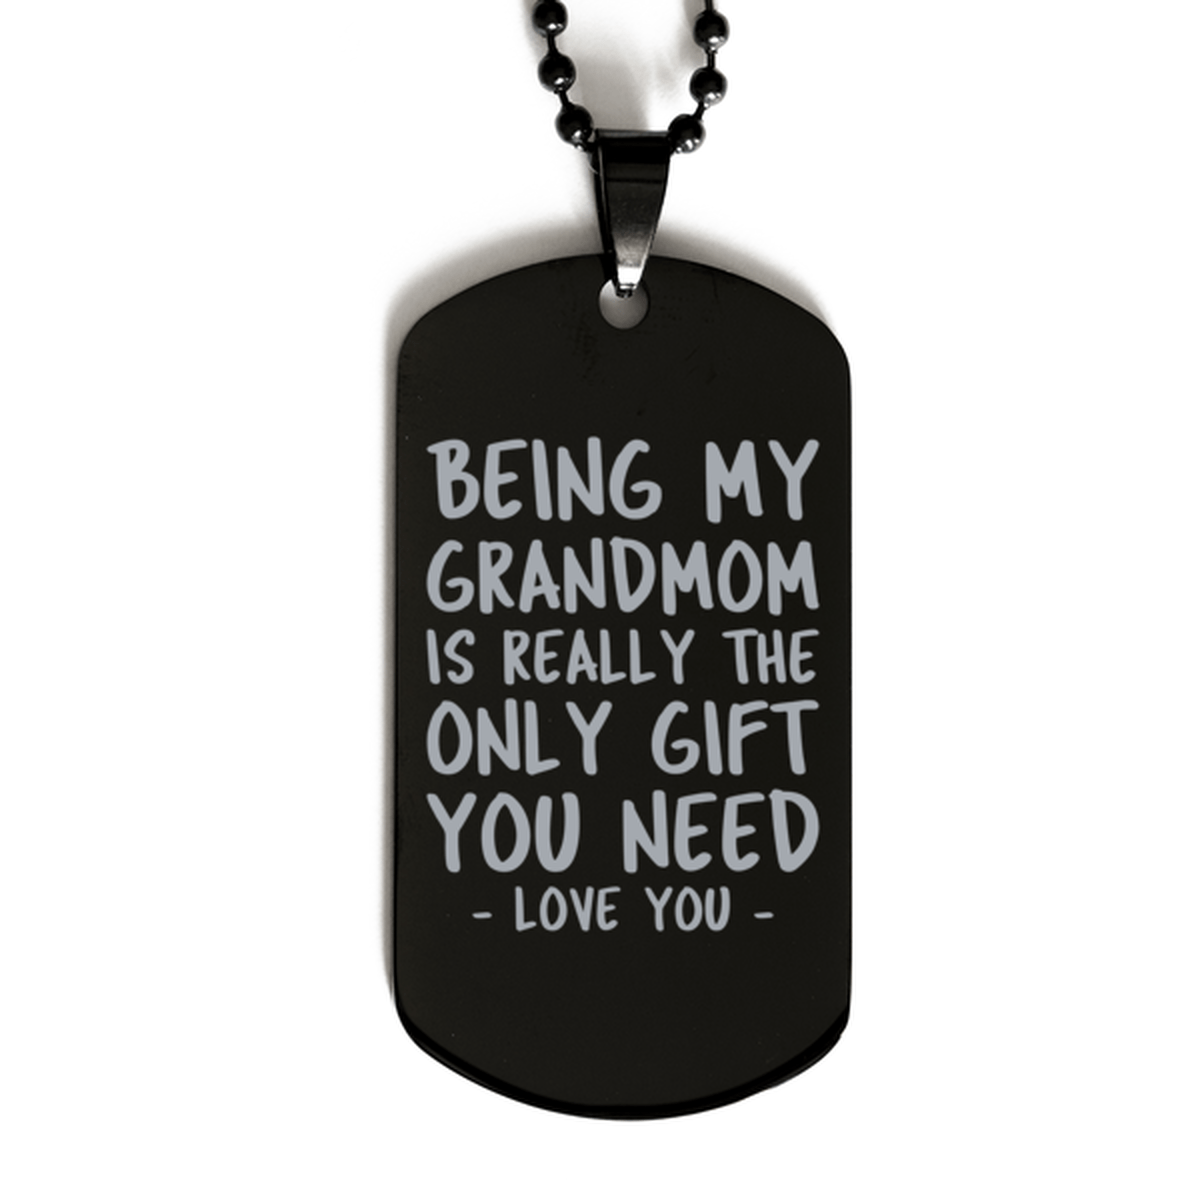 Funny Grandmom Black Dog Tag Necklace, Being My Grandmom Is Really the Only Gift You Need, Best Birthday Gifts for Grandmom